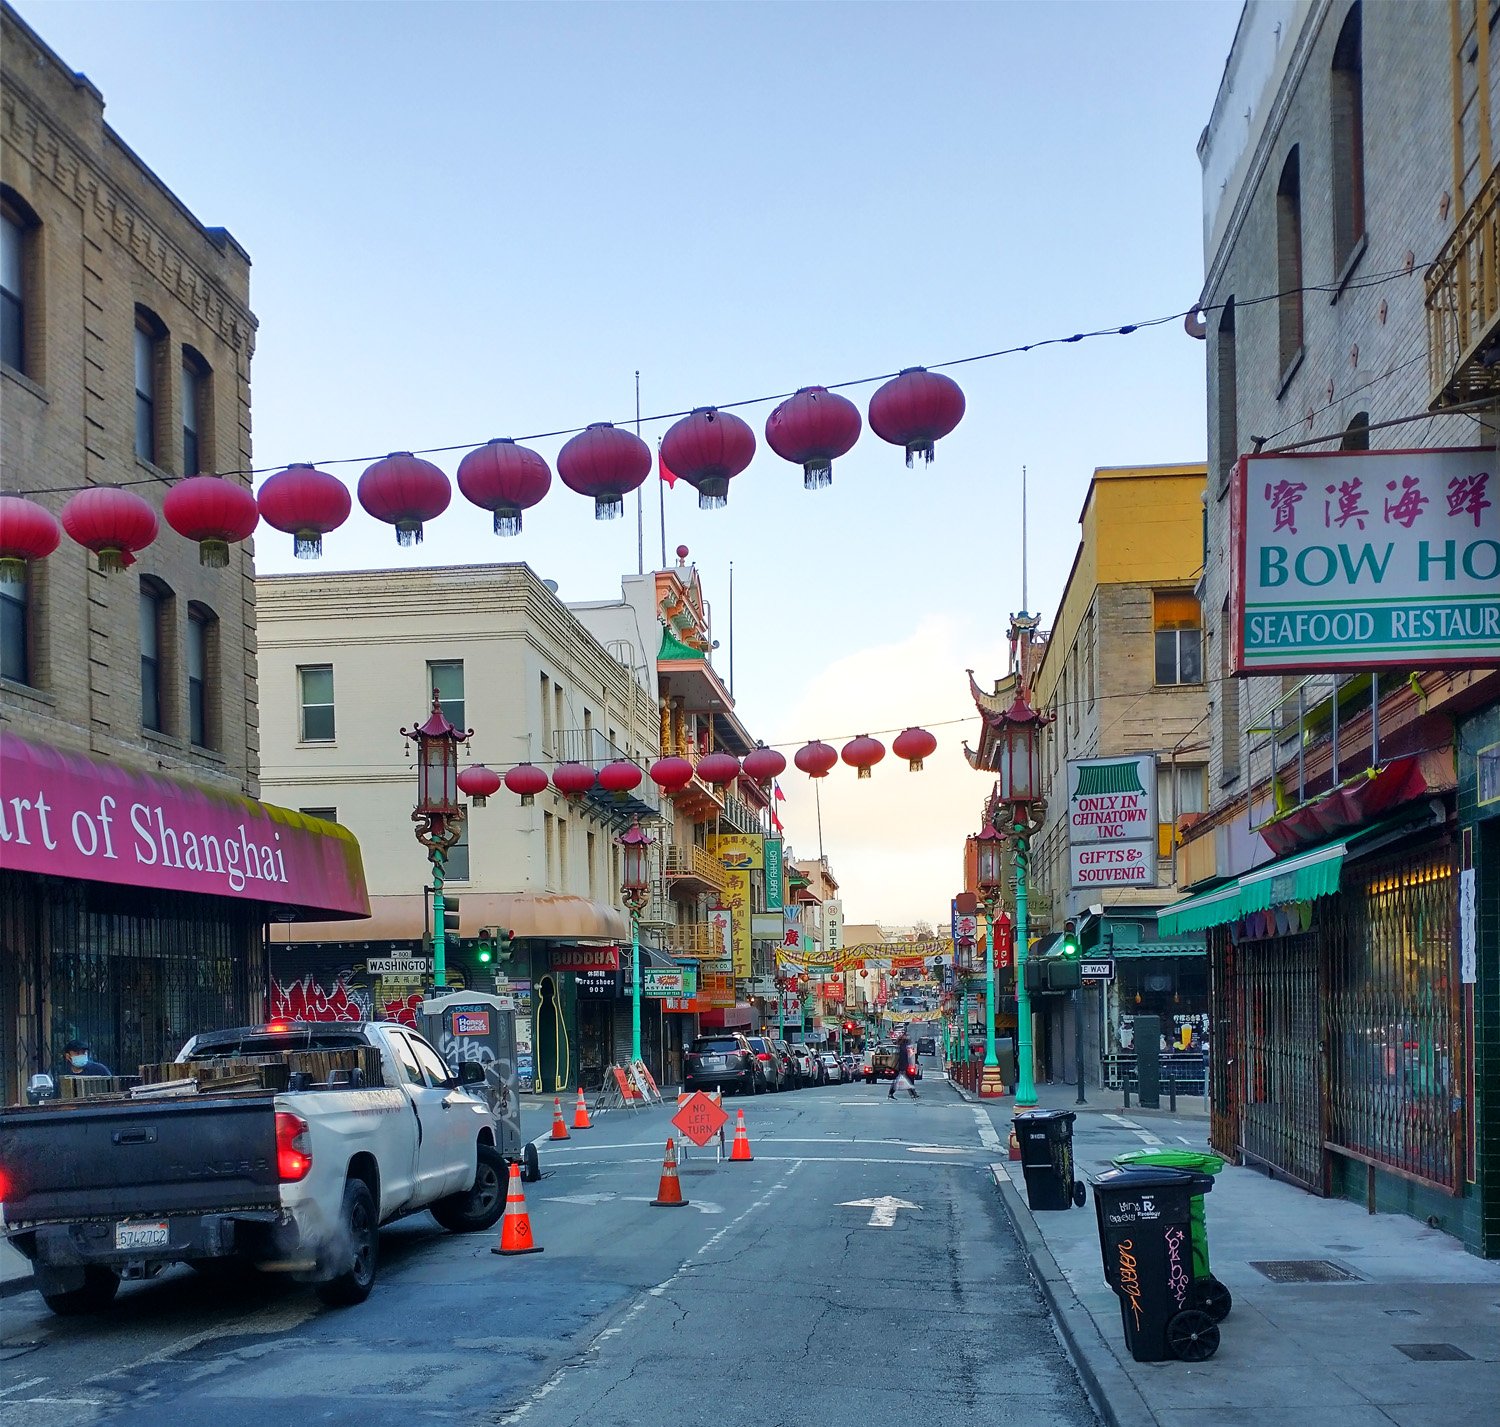 Last day in San Fran, leaving ChinaTown behind. Very goofy place.